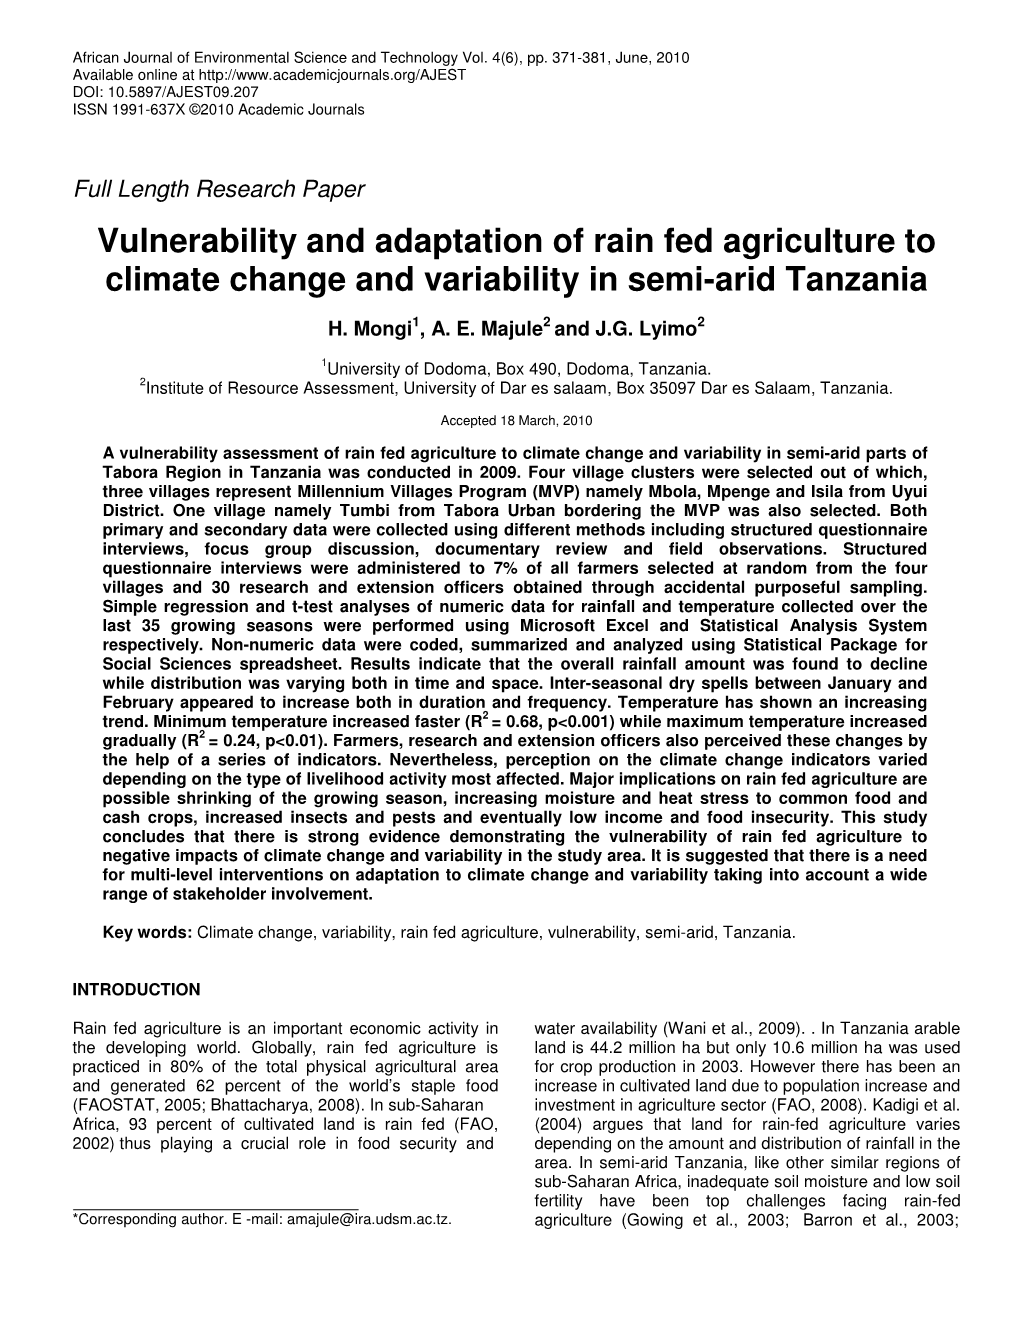 Vulnerability and Adaptation of Rain Fed Agriculture to Climate Change and Variability in Semi-Arid Tanzania